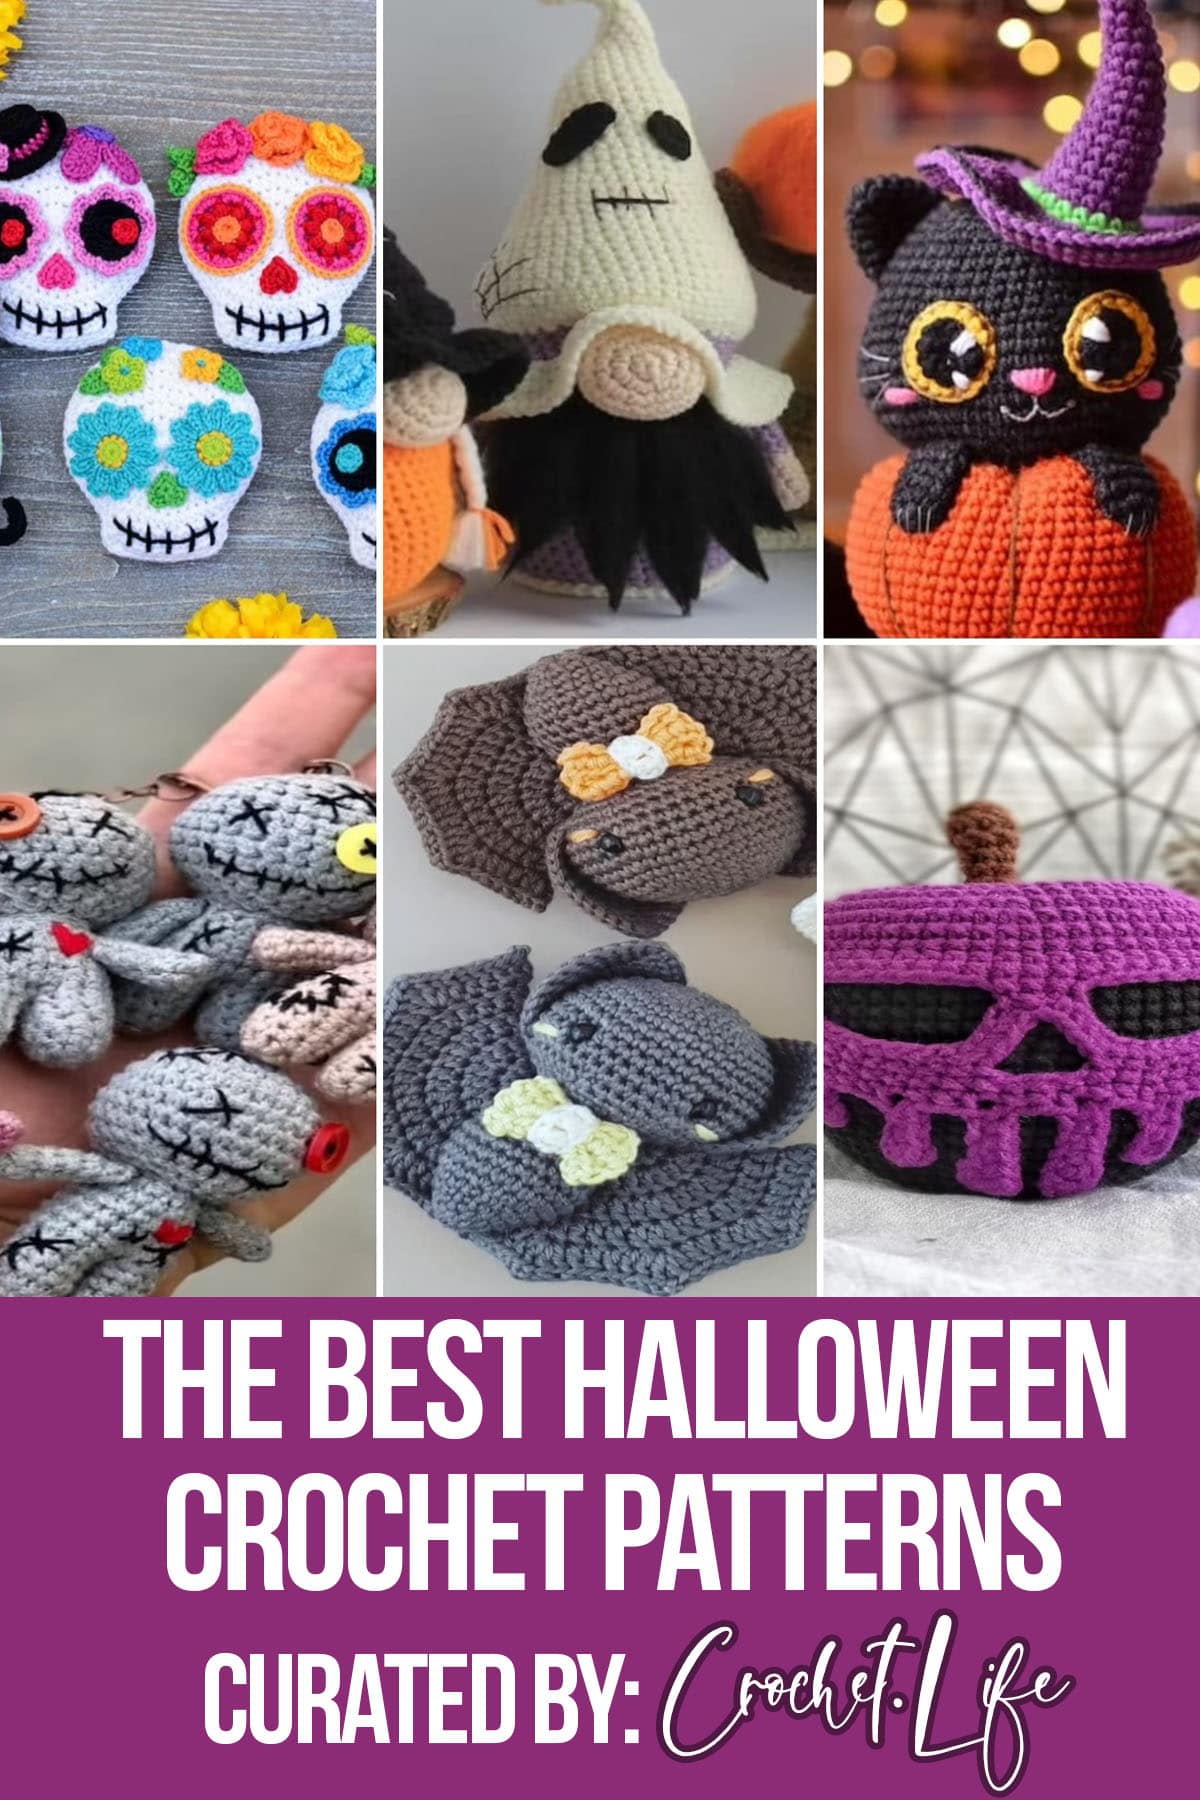 photo collage of crochet patterns for halloween with text which reads the best halloween crochet patterns curated by crochet.life